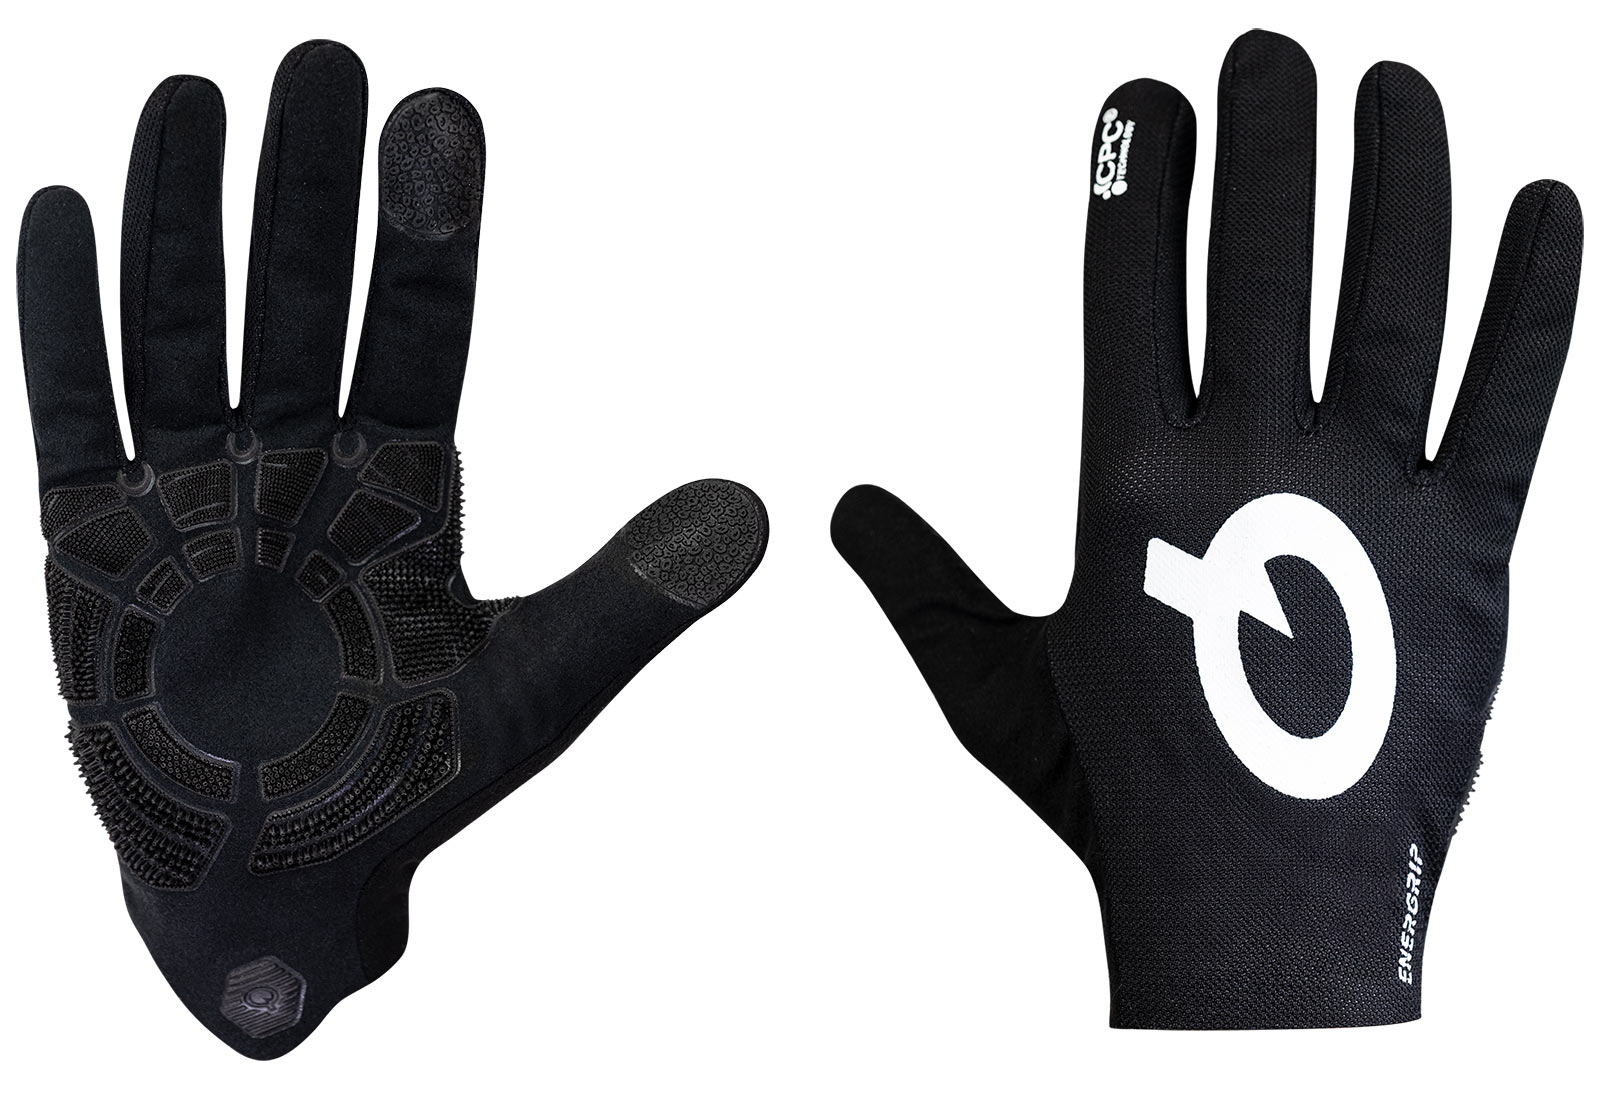 full finger prologo energrip team gloves with CPC vibration damping palm cushioning